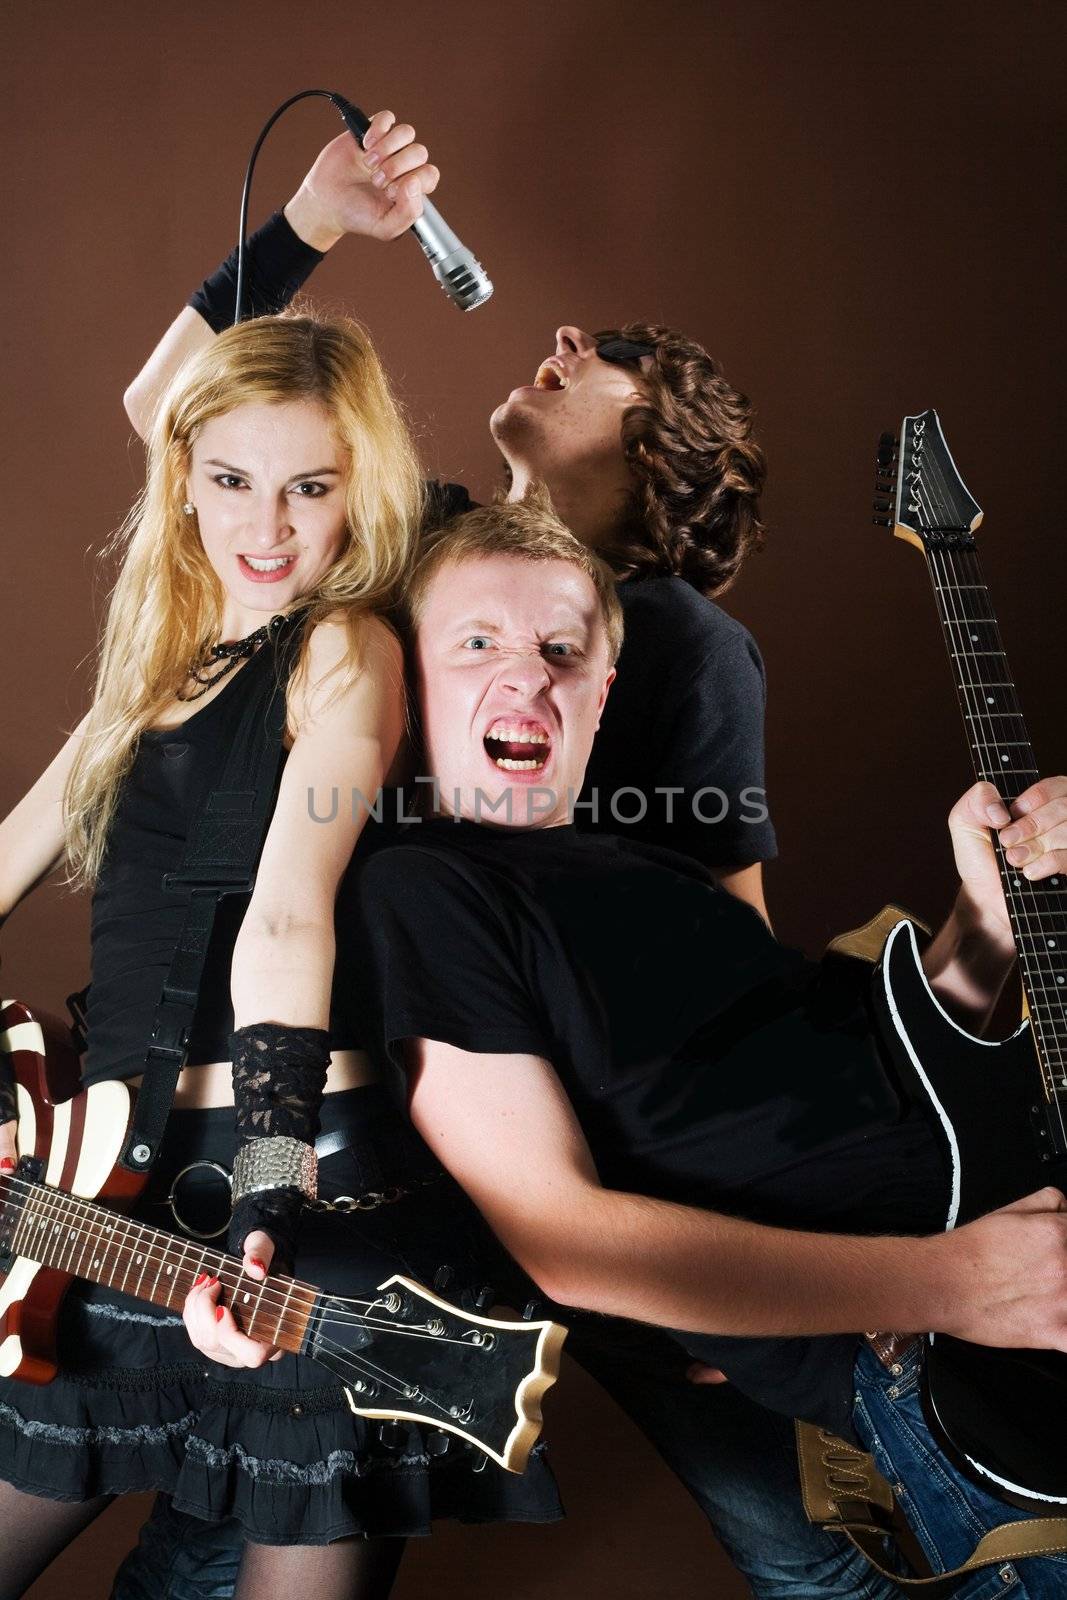 Funny rock band playing in photostudio